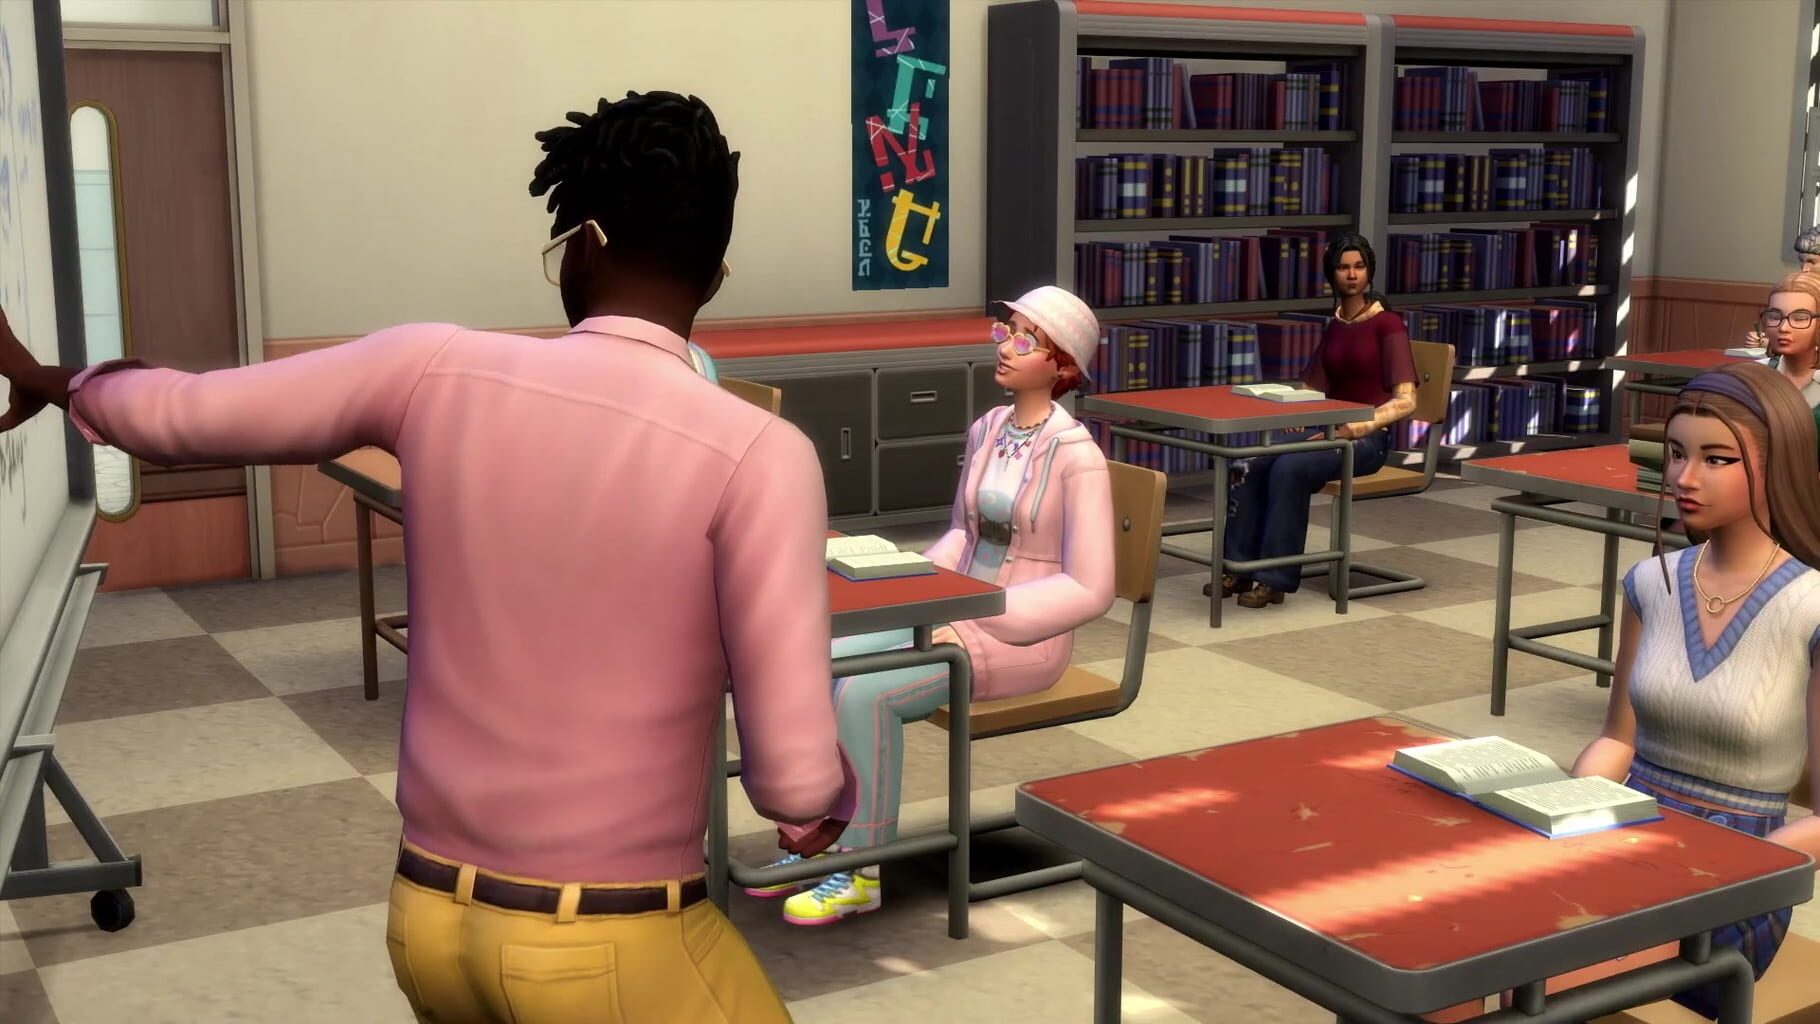 The Sims 4: High School Years Image